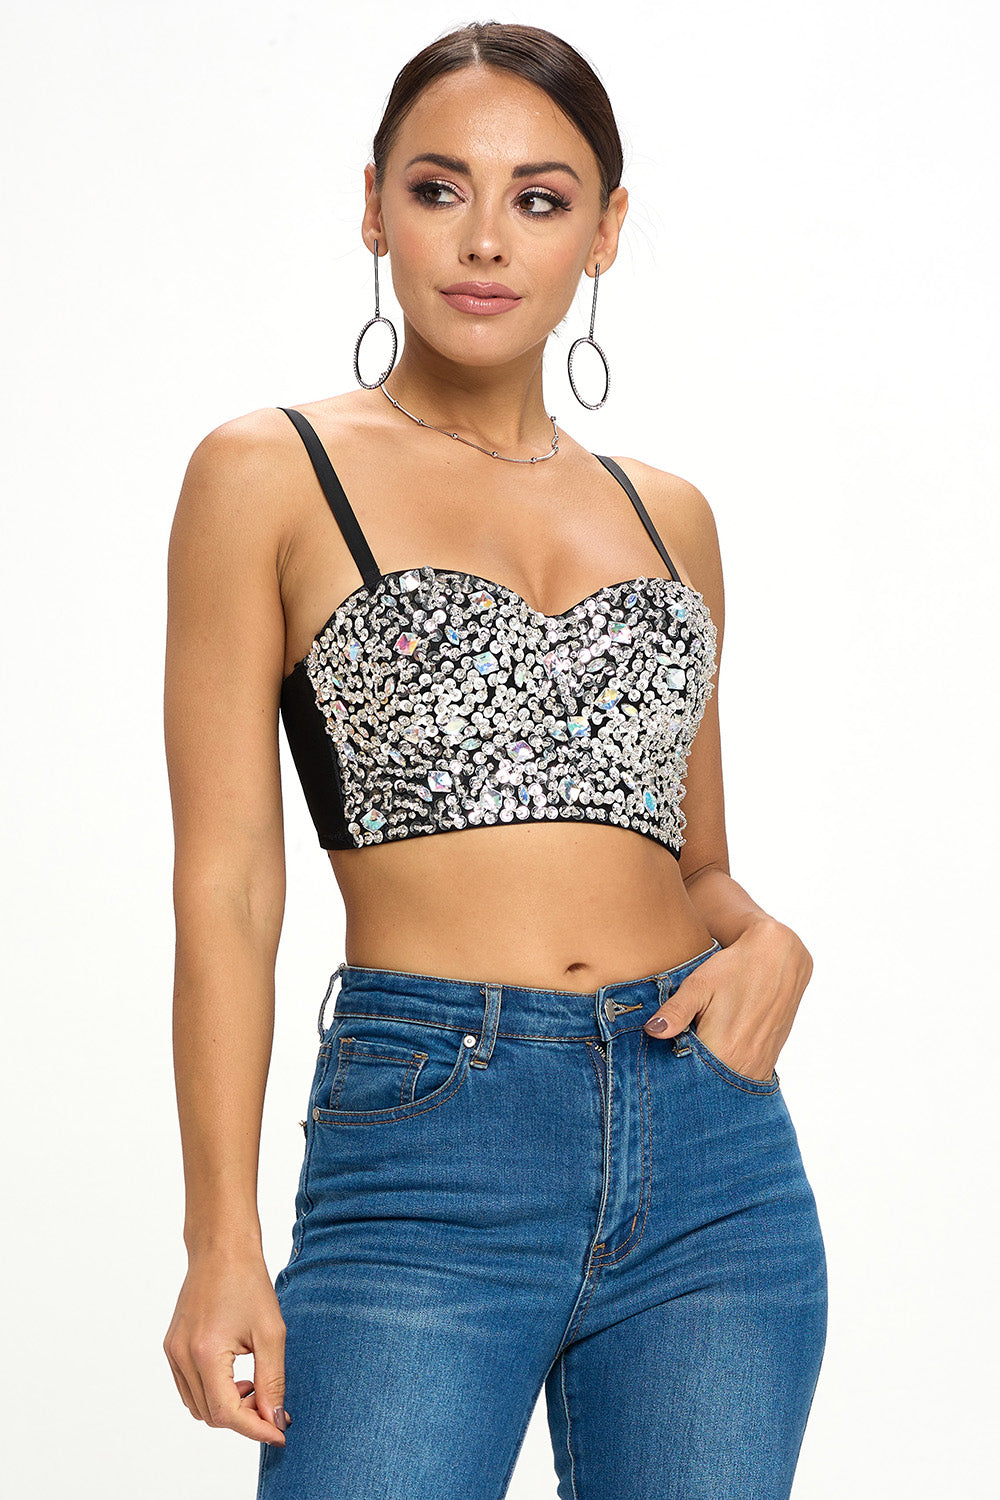 Forever 21 Women's Sequin Pleather Crop Top Sports Bra Size Small